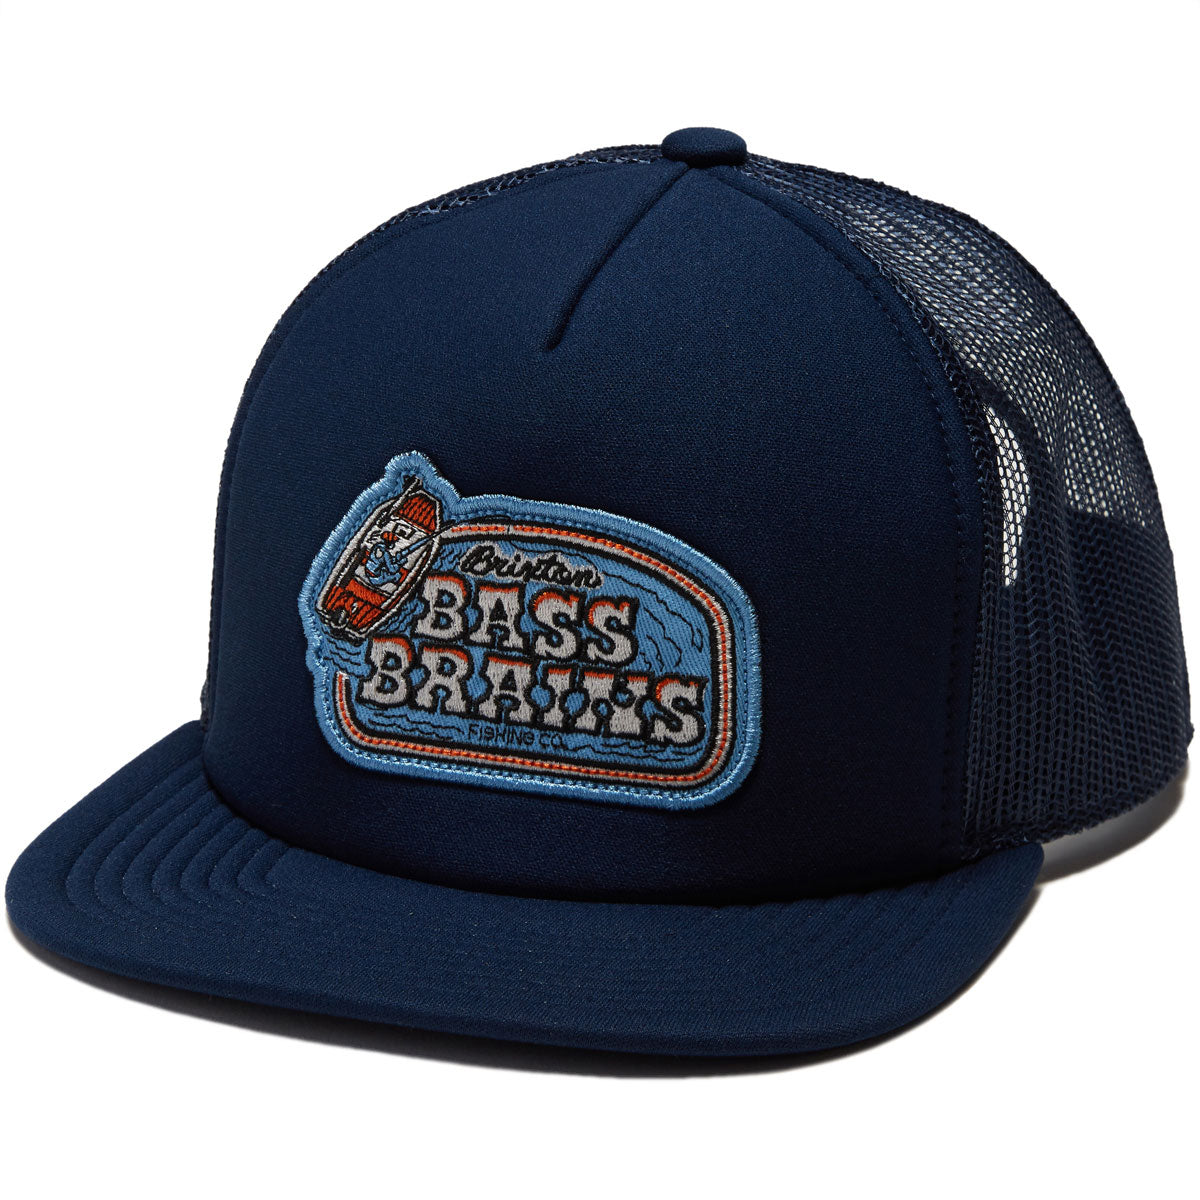 Brixton Bass Brains Boat Hp Trucker Hat - Washed Navy image 1